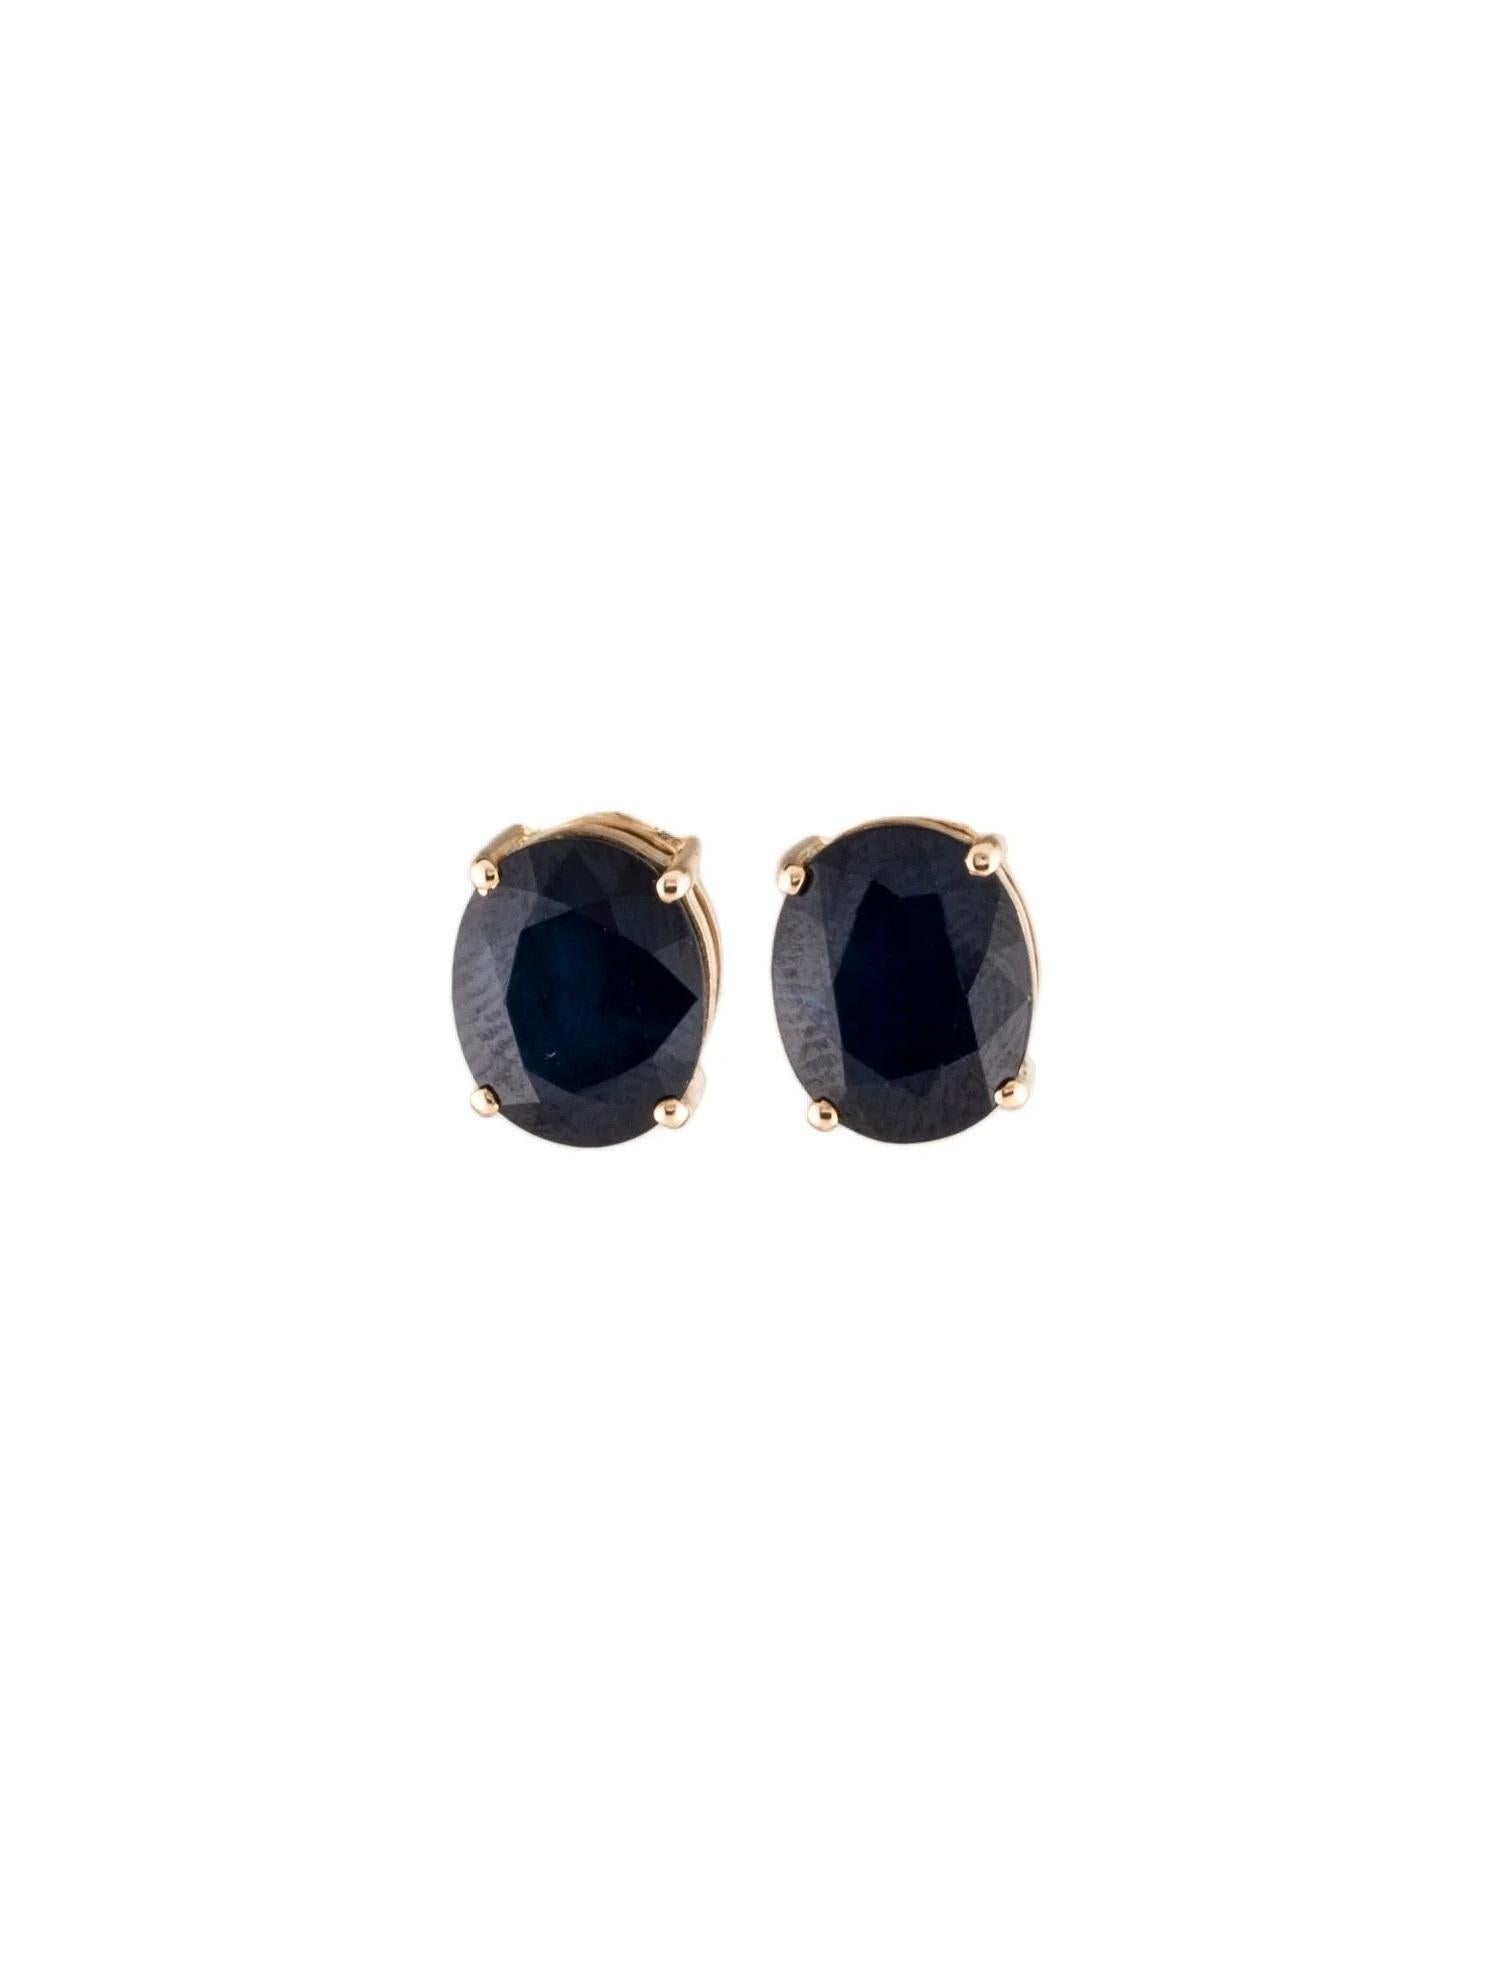 14K Sapphire Stud Earrings 6.58ctw Timeless, Fine Jewelry for Elegant Style In New Condition For Sale In Holtsville, NY